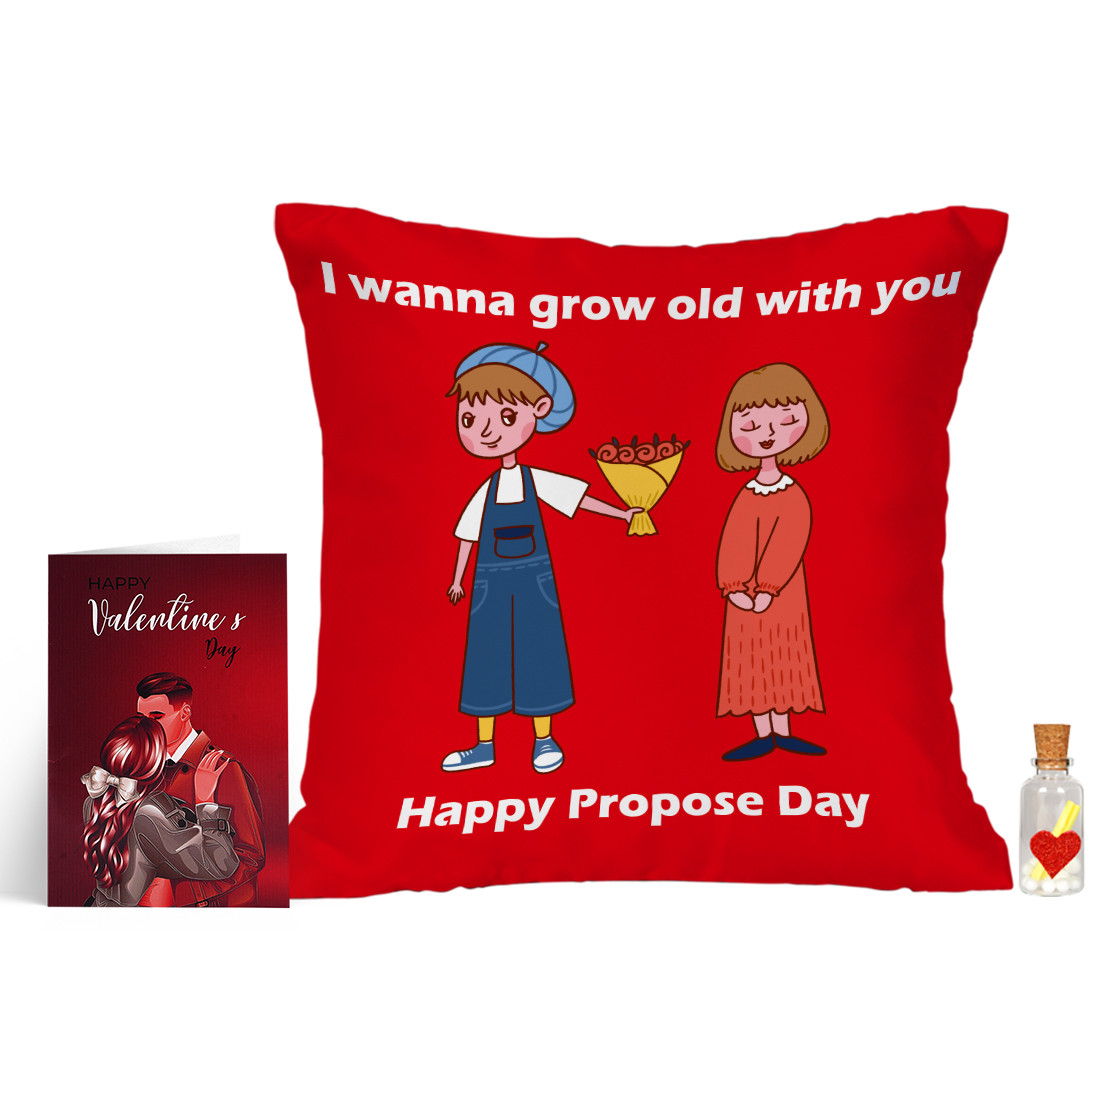 LOF Valentine Day Gift Set for Girlfriend Boyfriend Promise and Propose Day  Gift Set L-6 : Buy Online at Best Price in KSA - Souq is now Amazon.sa: Toys